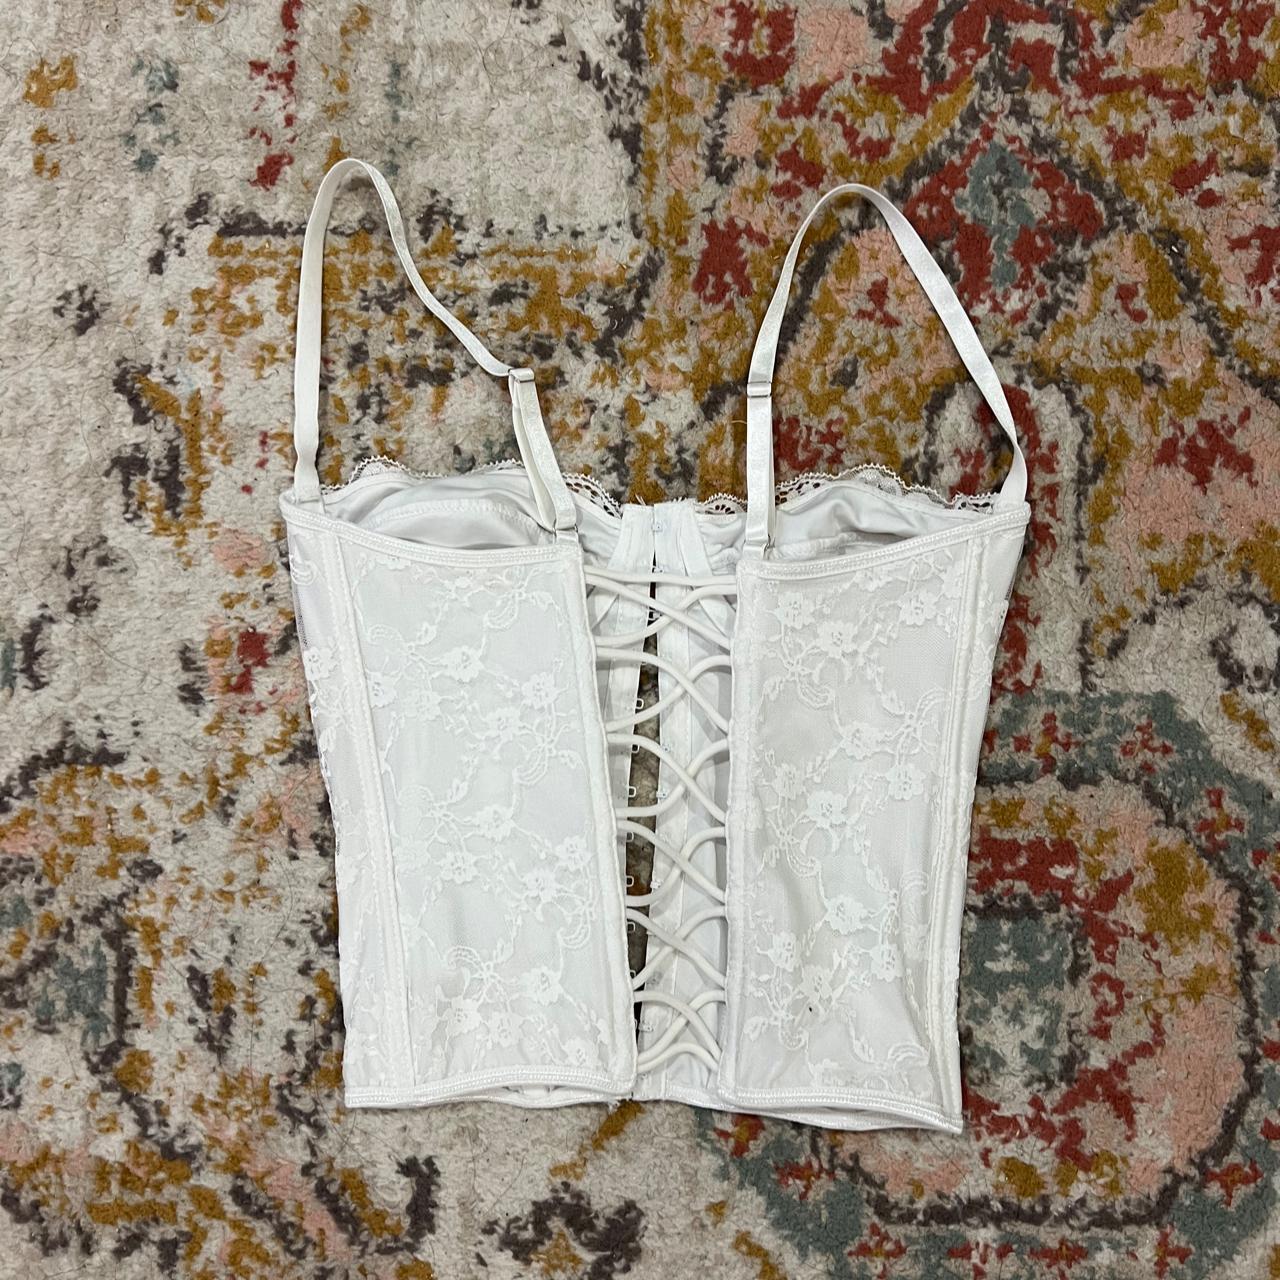 White Lace Bustier Corset Top, Very flattering